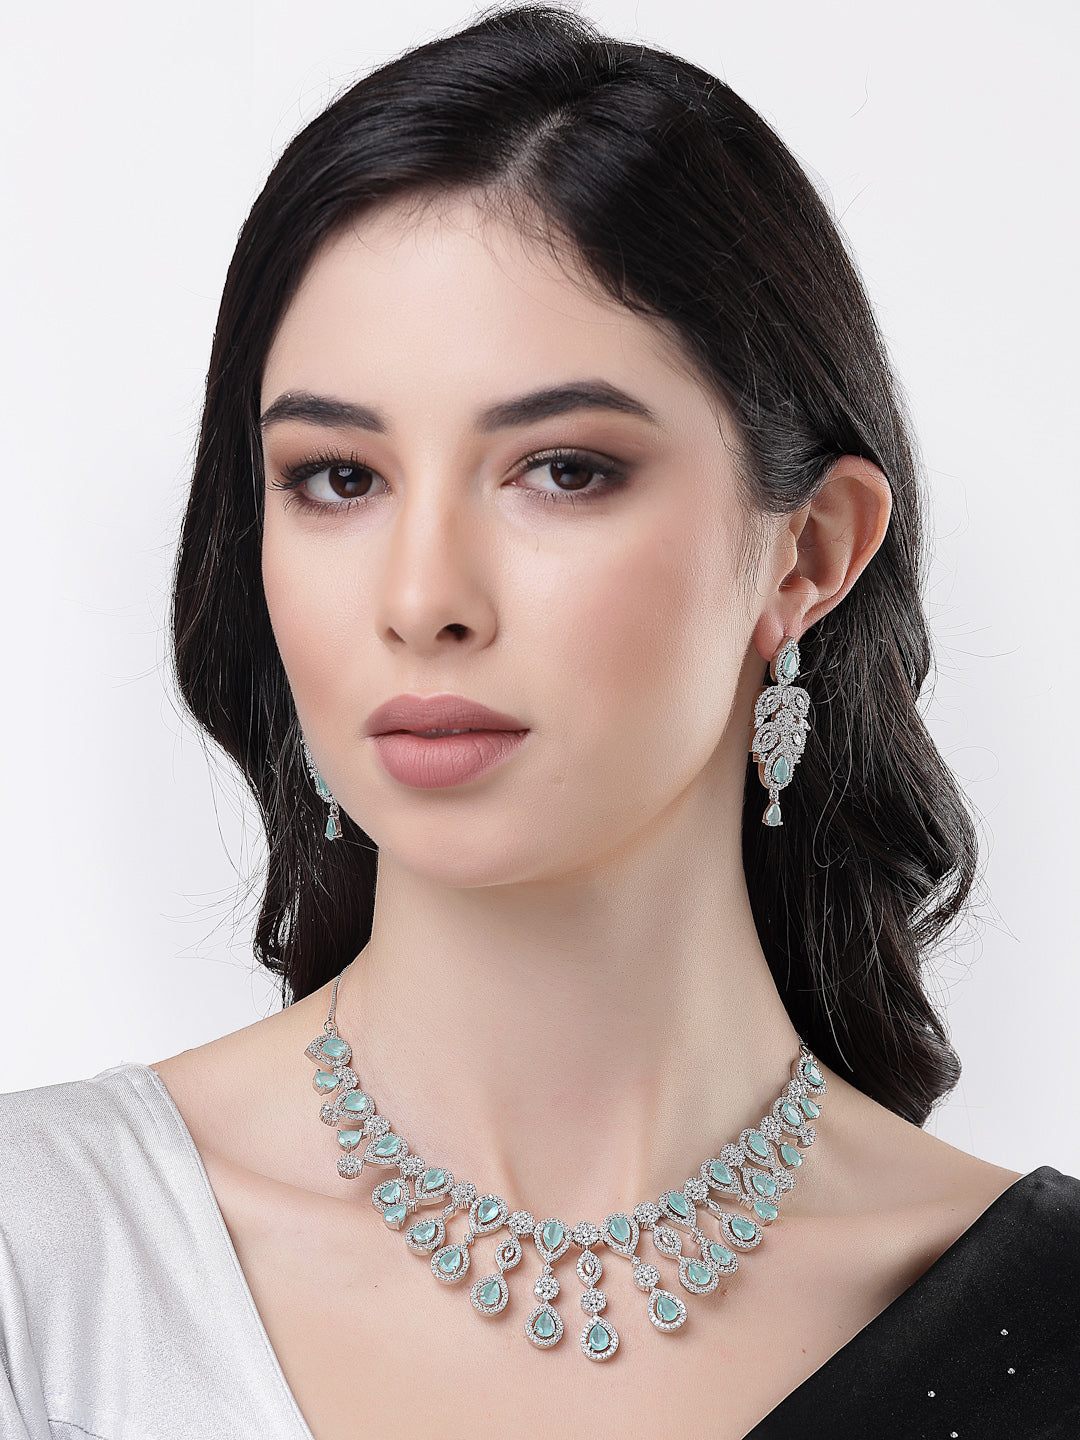 Women's silver plated & Turquoise CZ stone handcrafted jewellery set - NVR